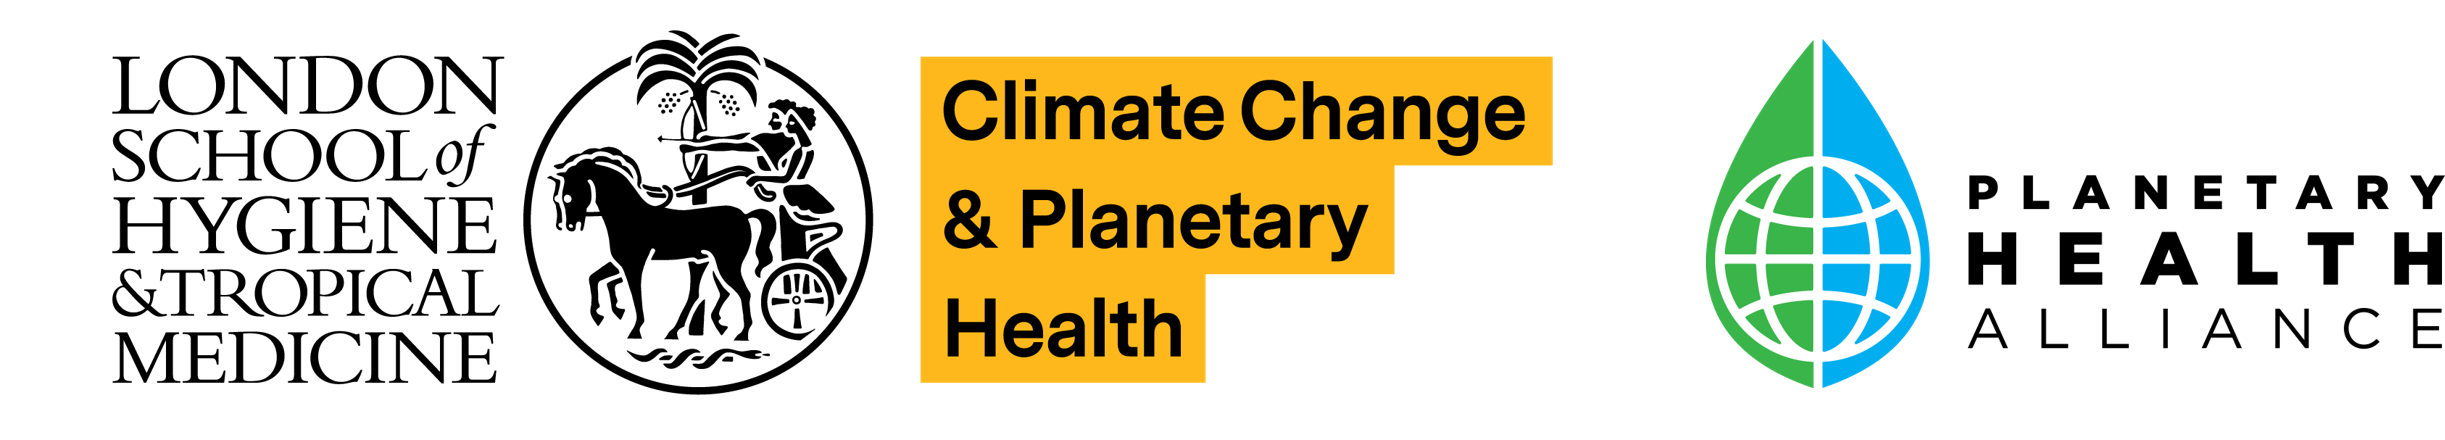 LSHTM Centre for Climate Change & Planetary Health and Planetary Health Alliance logo